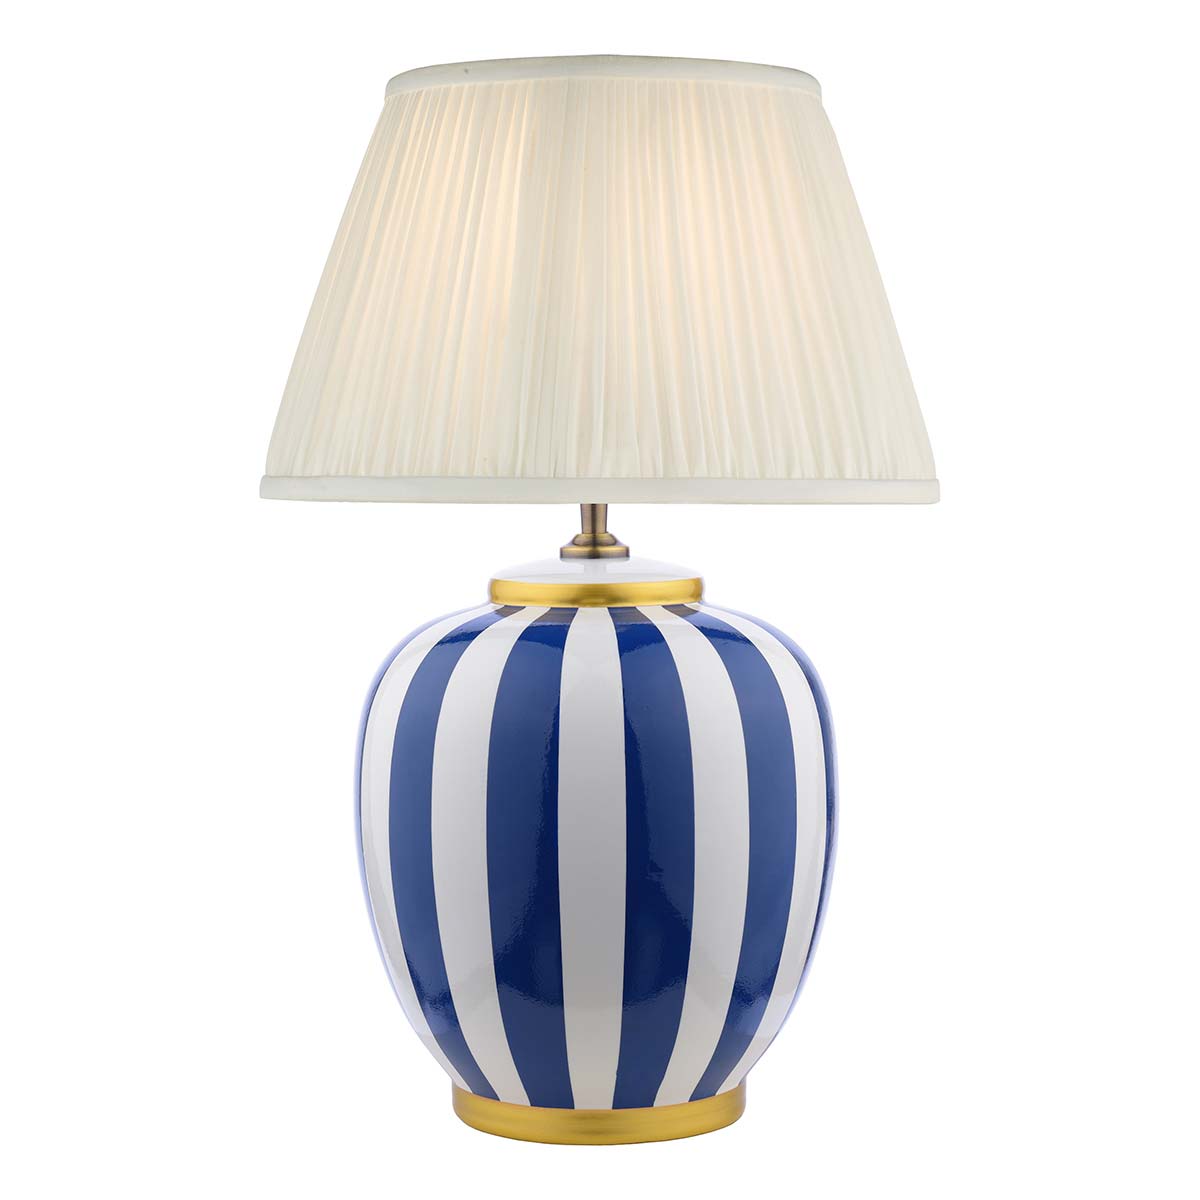 Dar Circus Blue and White Ceramic Table Lamp Ivory Shade